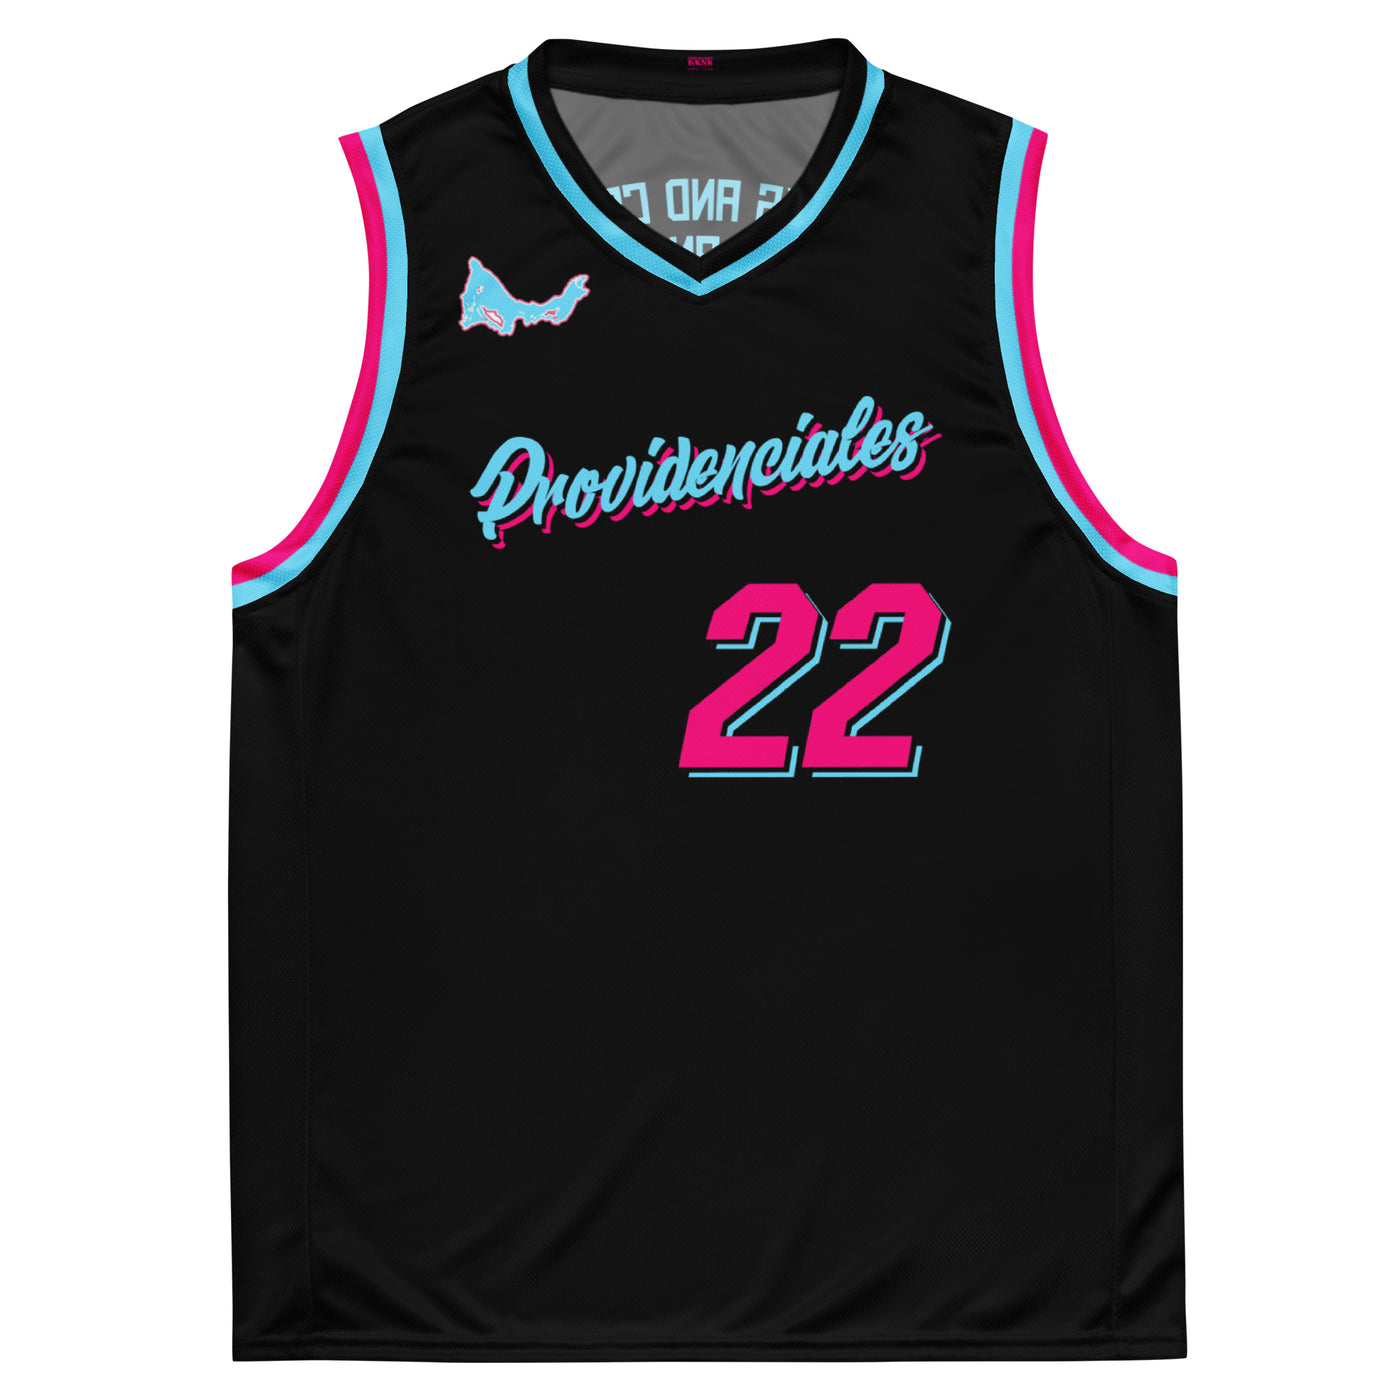 Providenciales Jersey